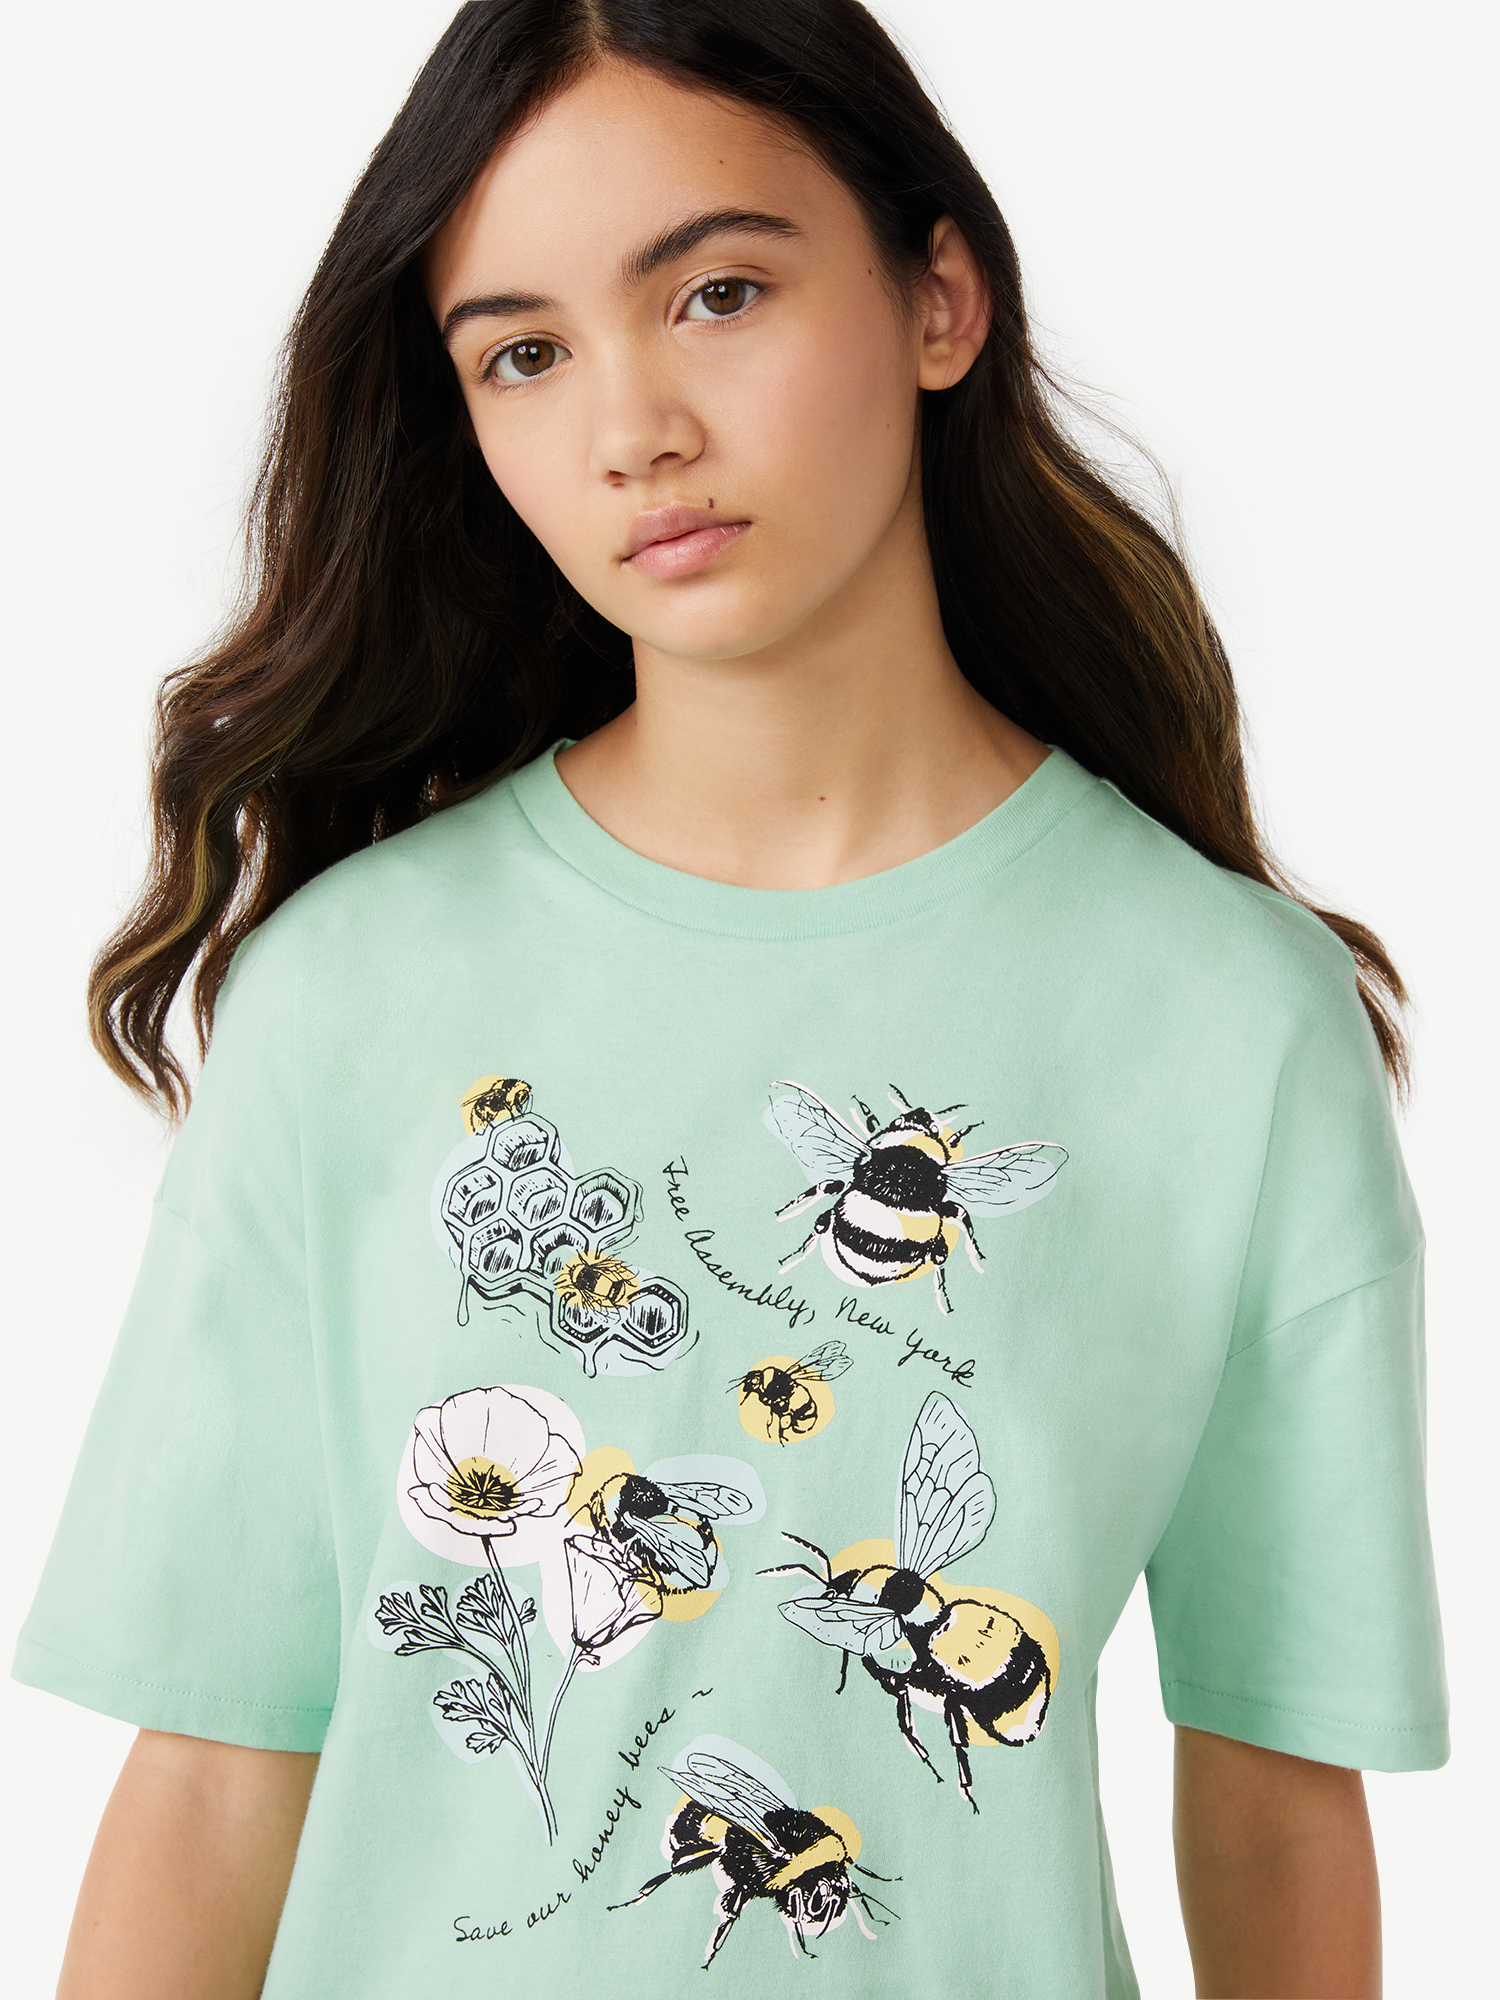 Free Assembly Girls Oversized Graphic Tee with Short Sleeves, Sizes 4-18 - image 4 of 5